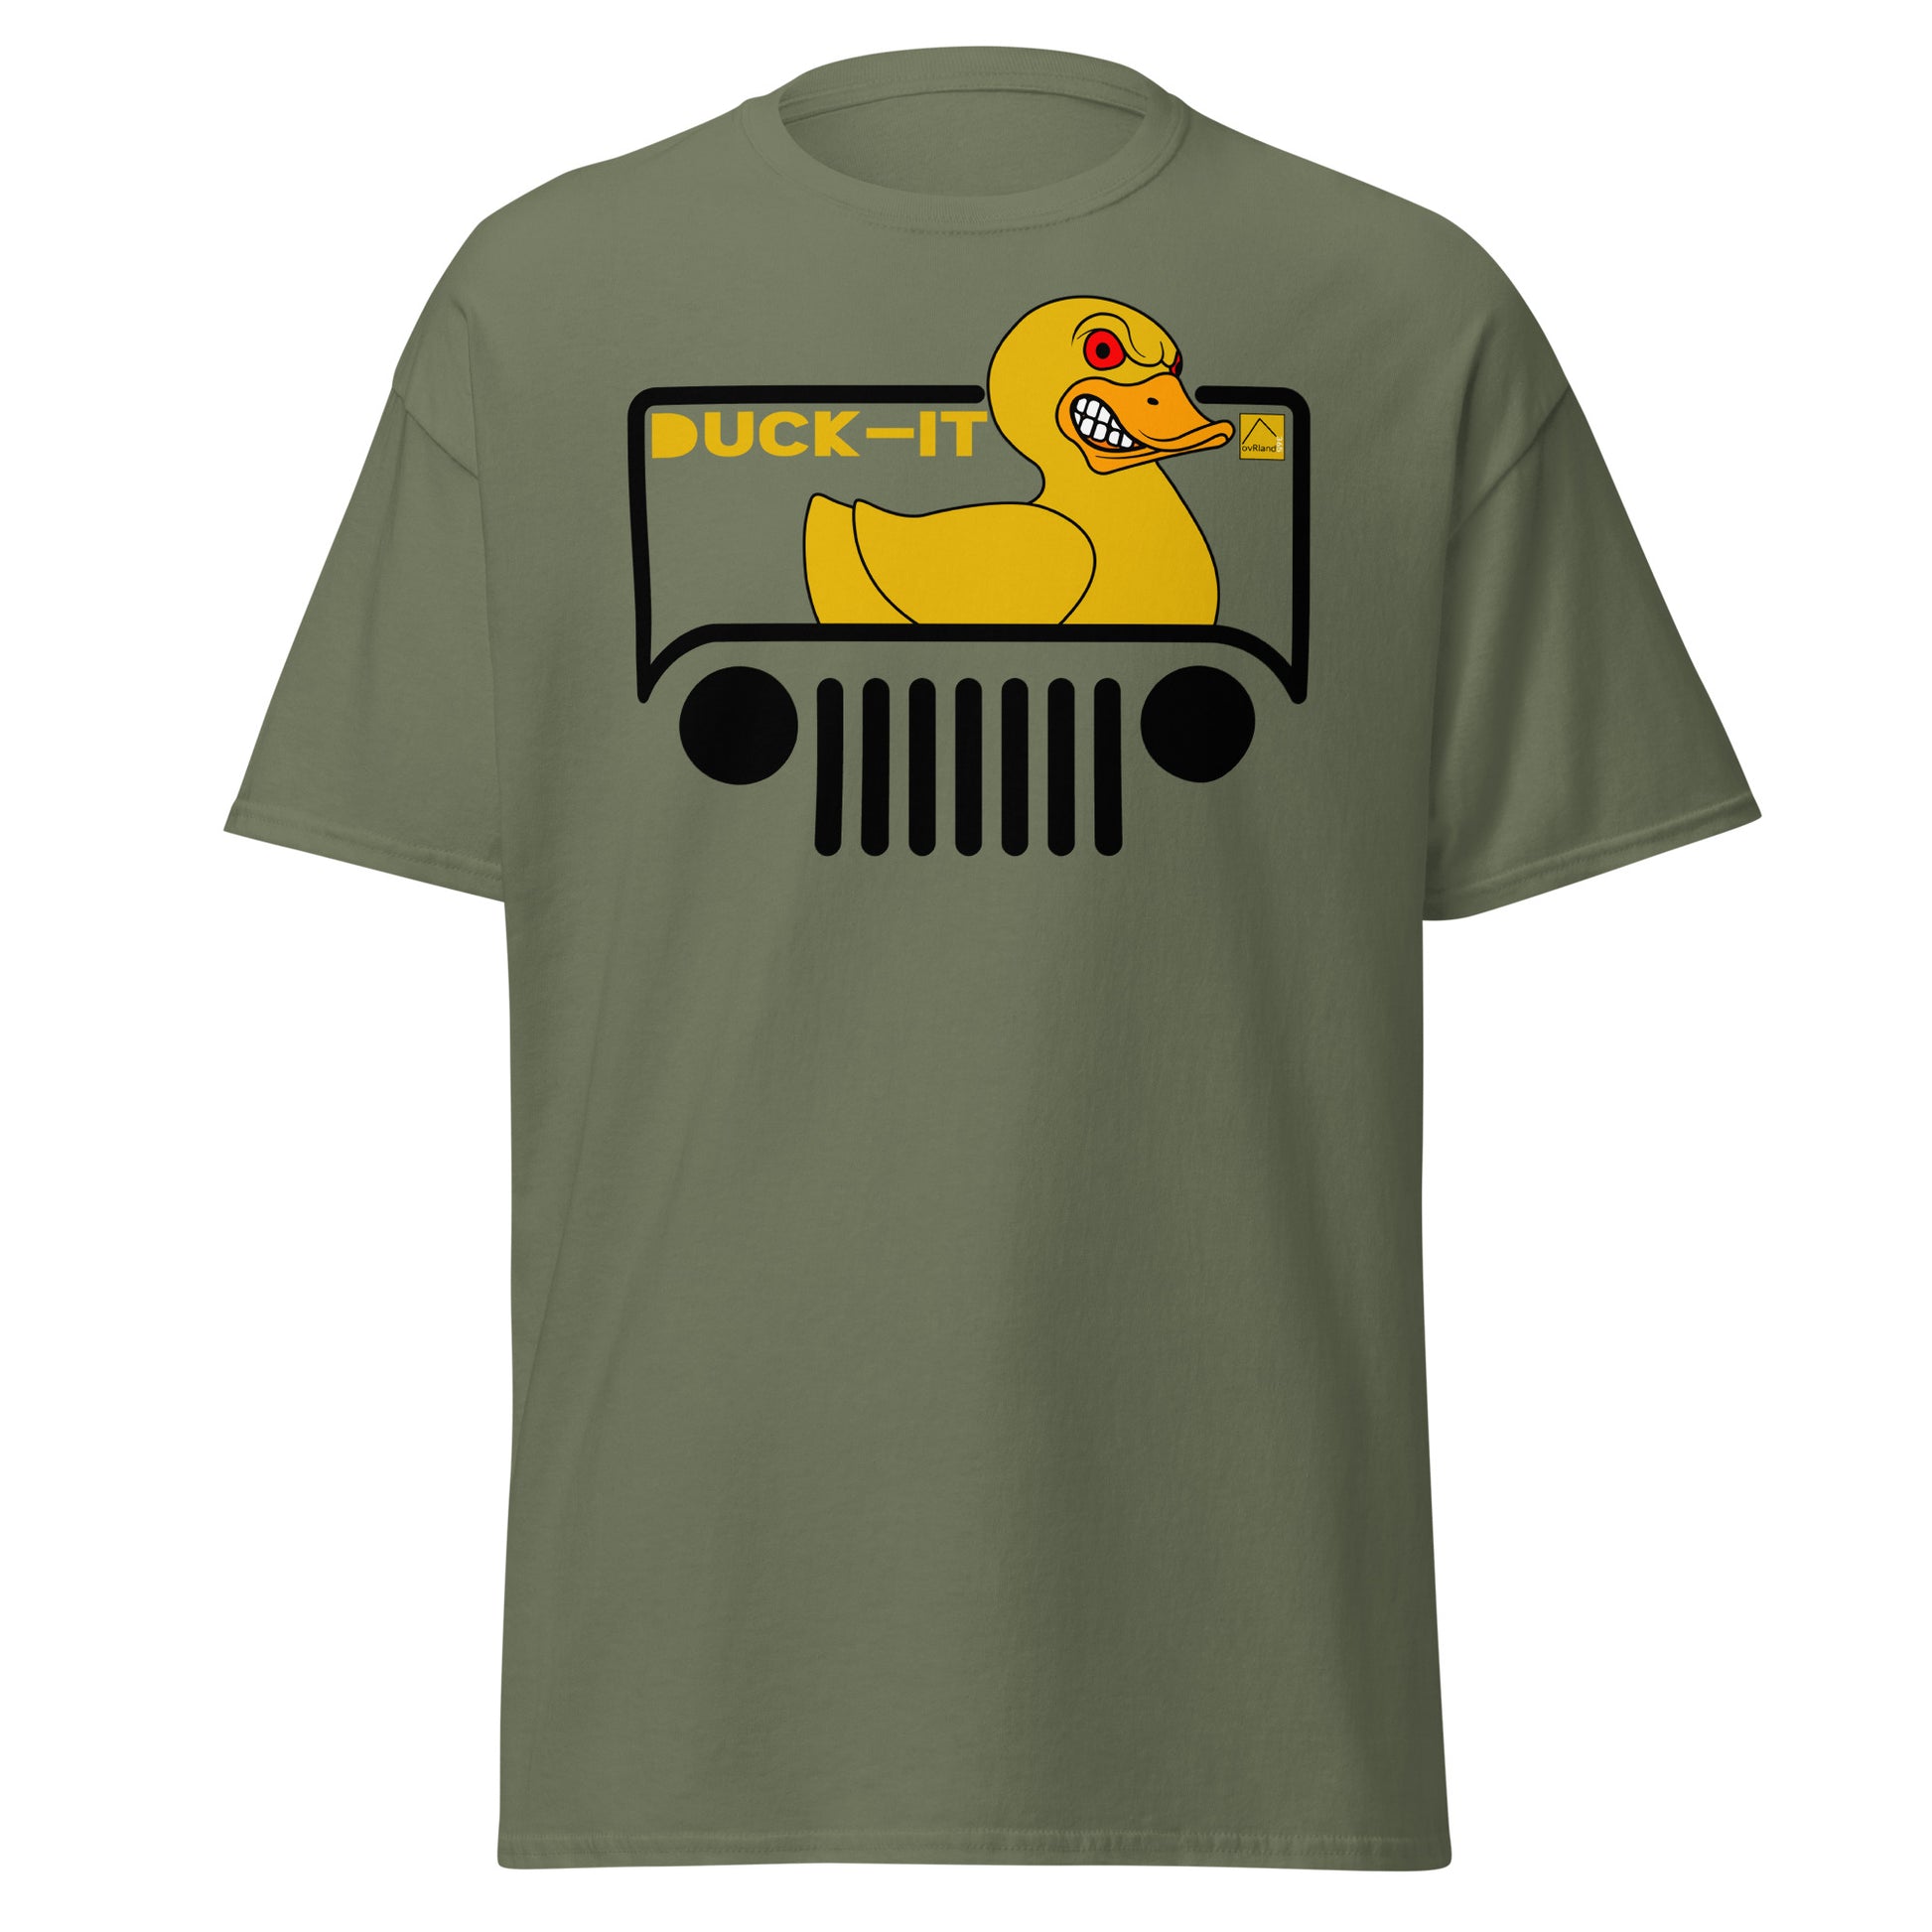 Jeep Green angry duck DUCK-IT shirt. overland365.com